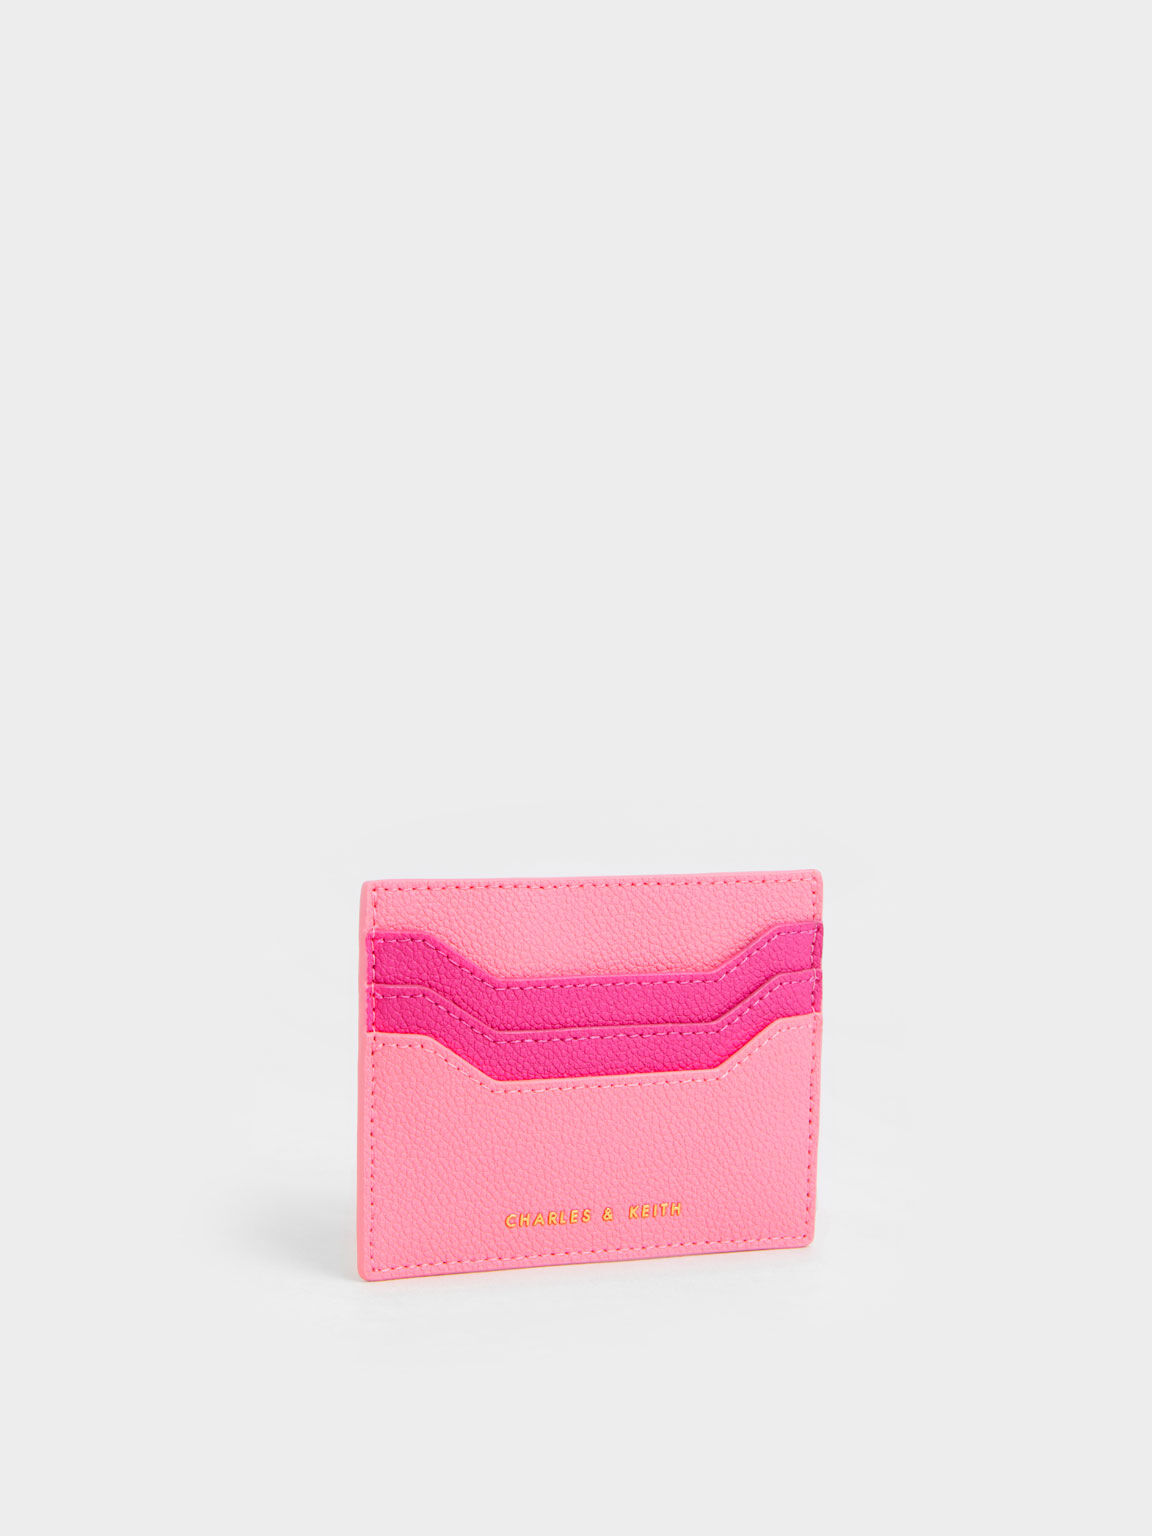 Fuchsia Paffuto Chain Handle Quilted Long Wallet, CHARLES & KEITH